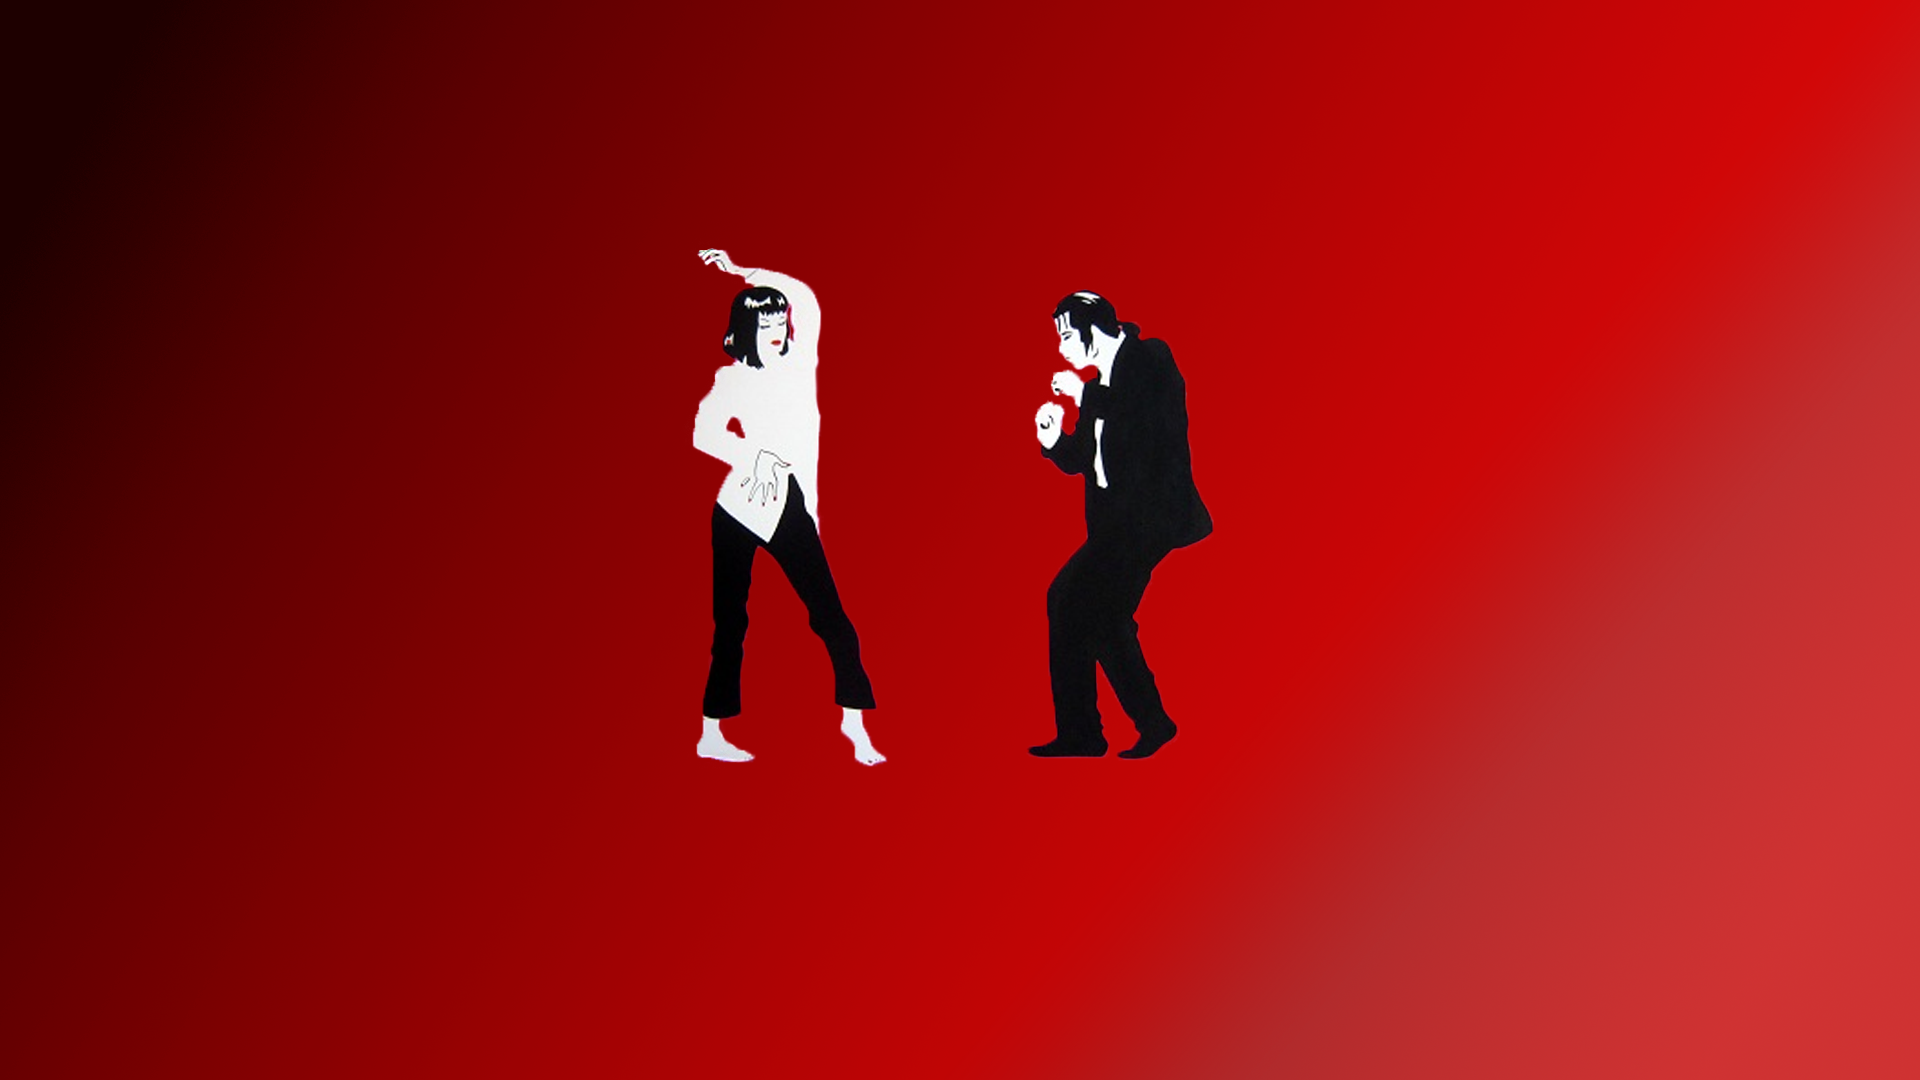 Pulp Fiction Wallpaper By Yjoker Awesome